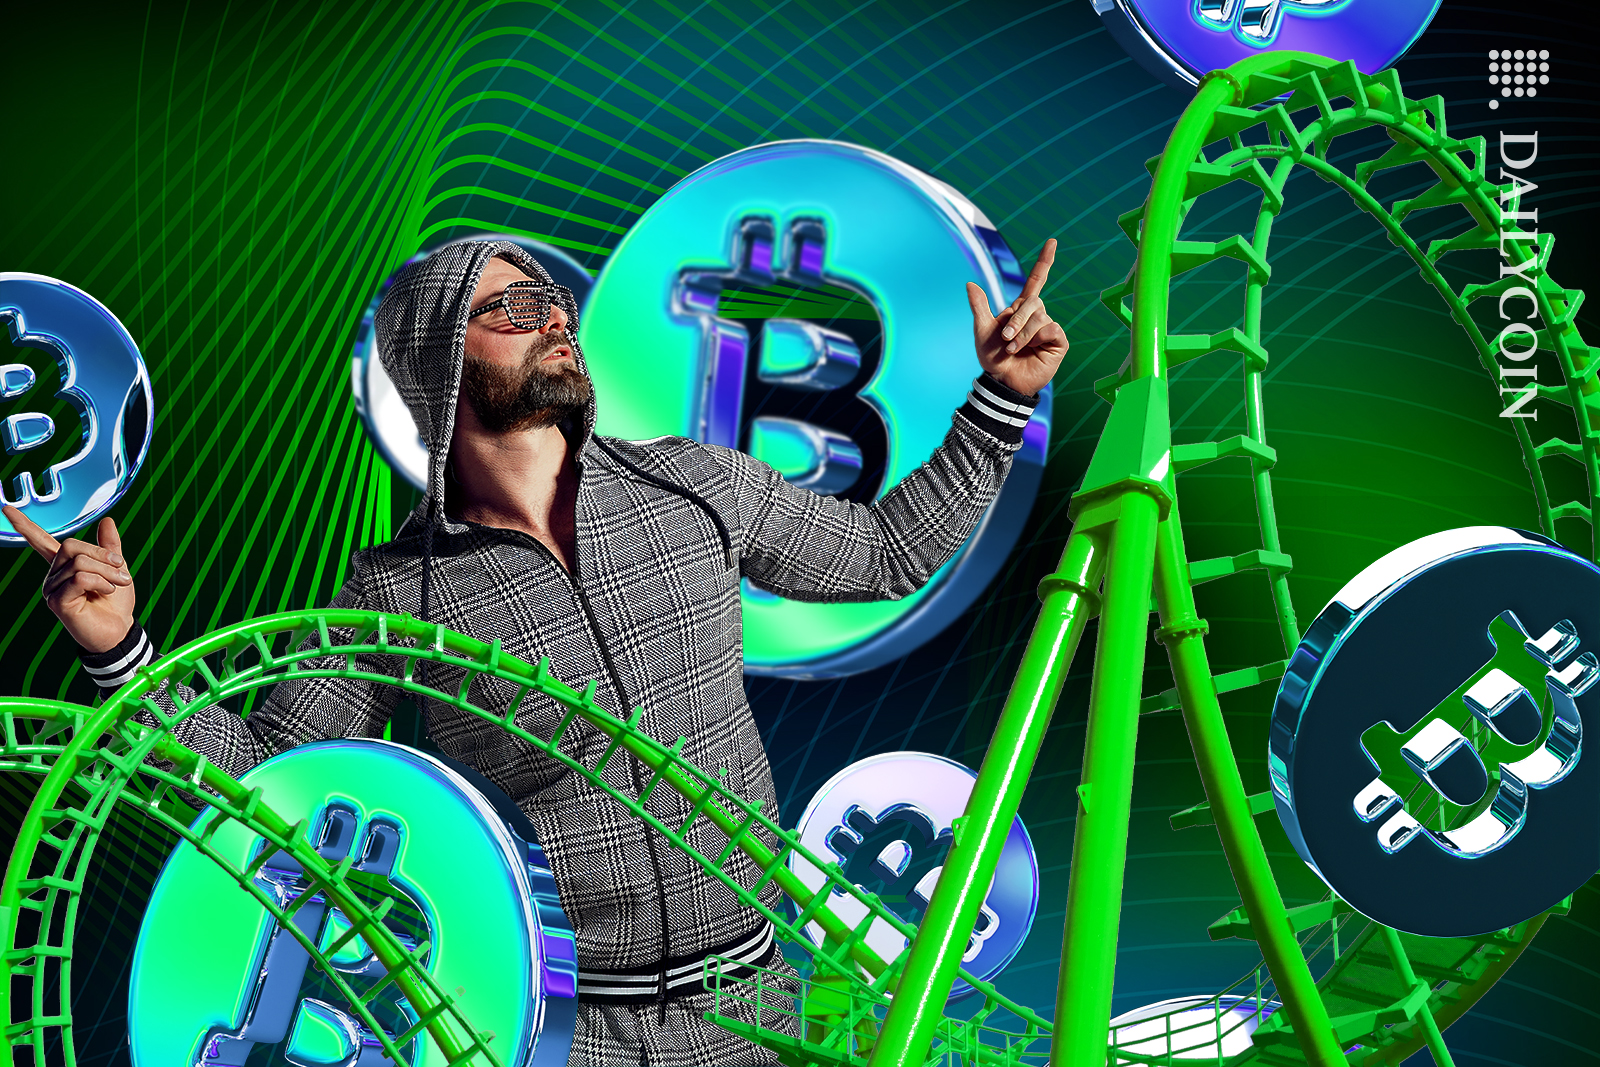 Man in the middle of the Bitcoin rollercoaster.